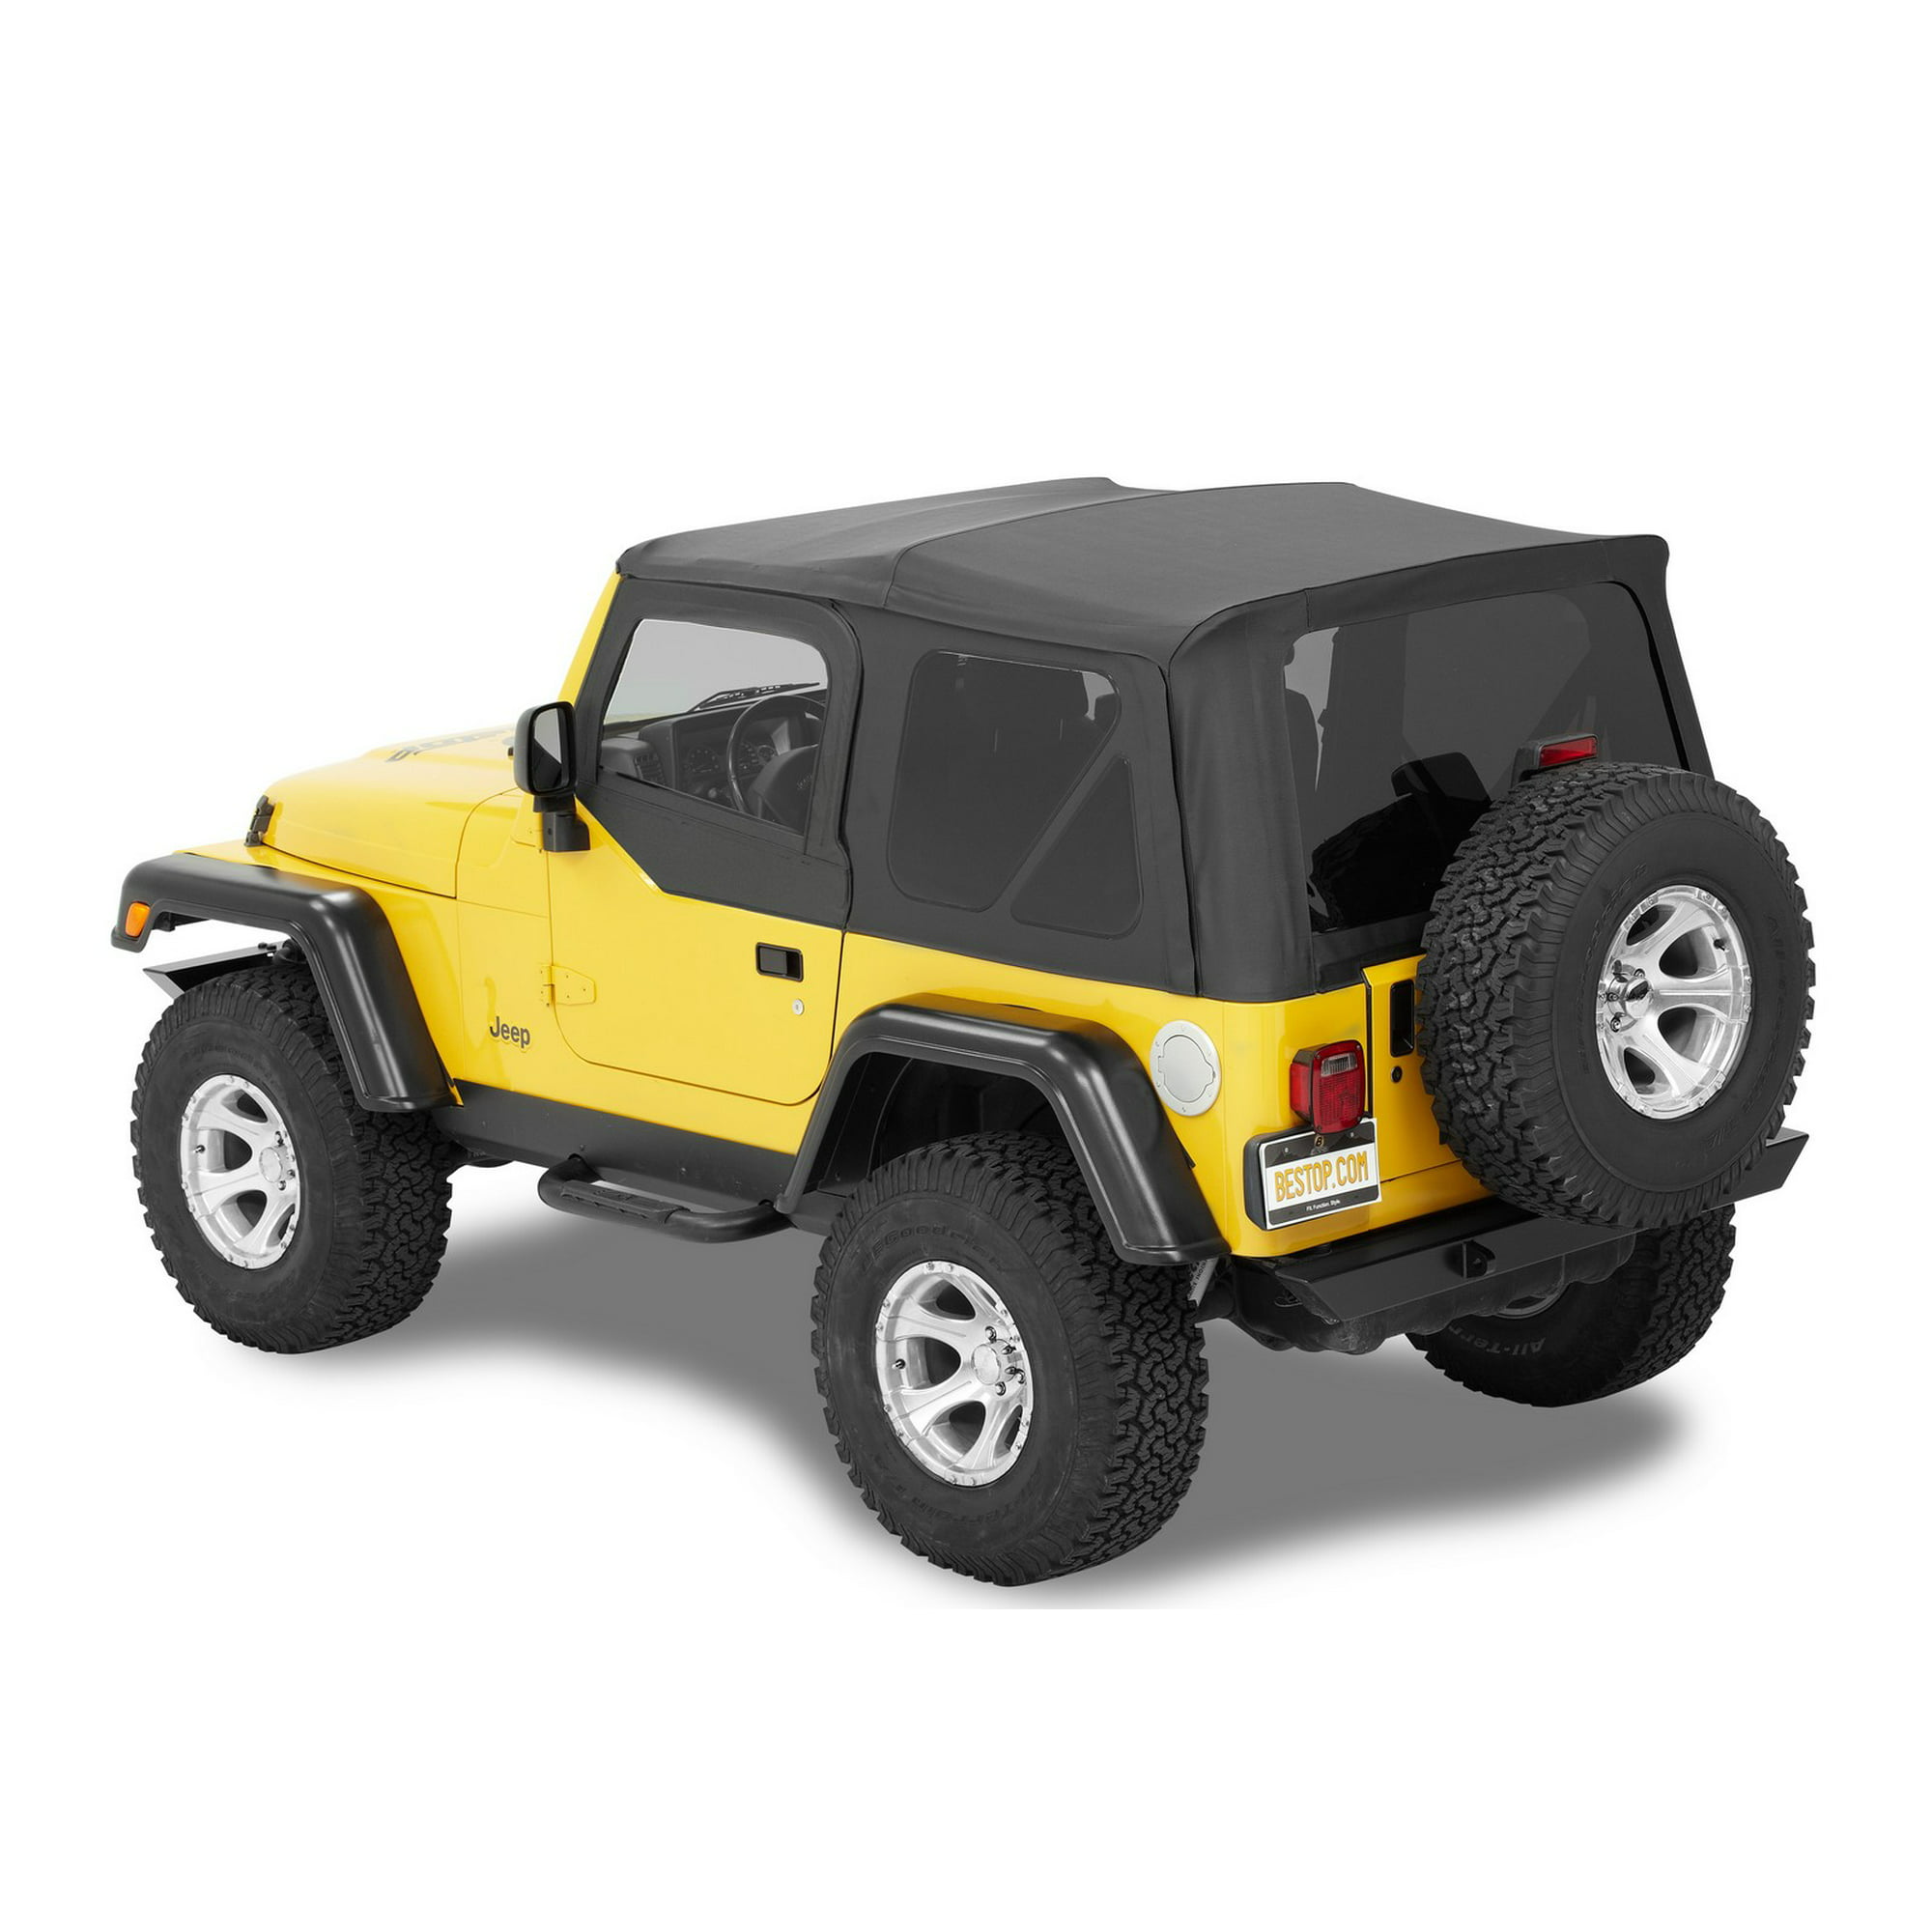 Bestop 54720-35 Soft Top Supertop NX Black Diamond; Fabric; Without Doors;  With Tinted Vinyl Side and Rear Windows; With Sunroof; Includes Hardware |  Walmart Canada